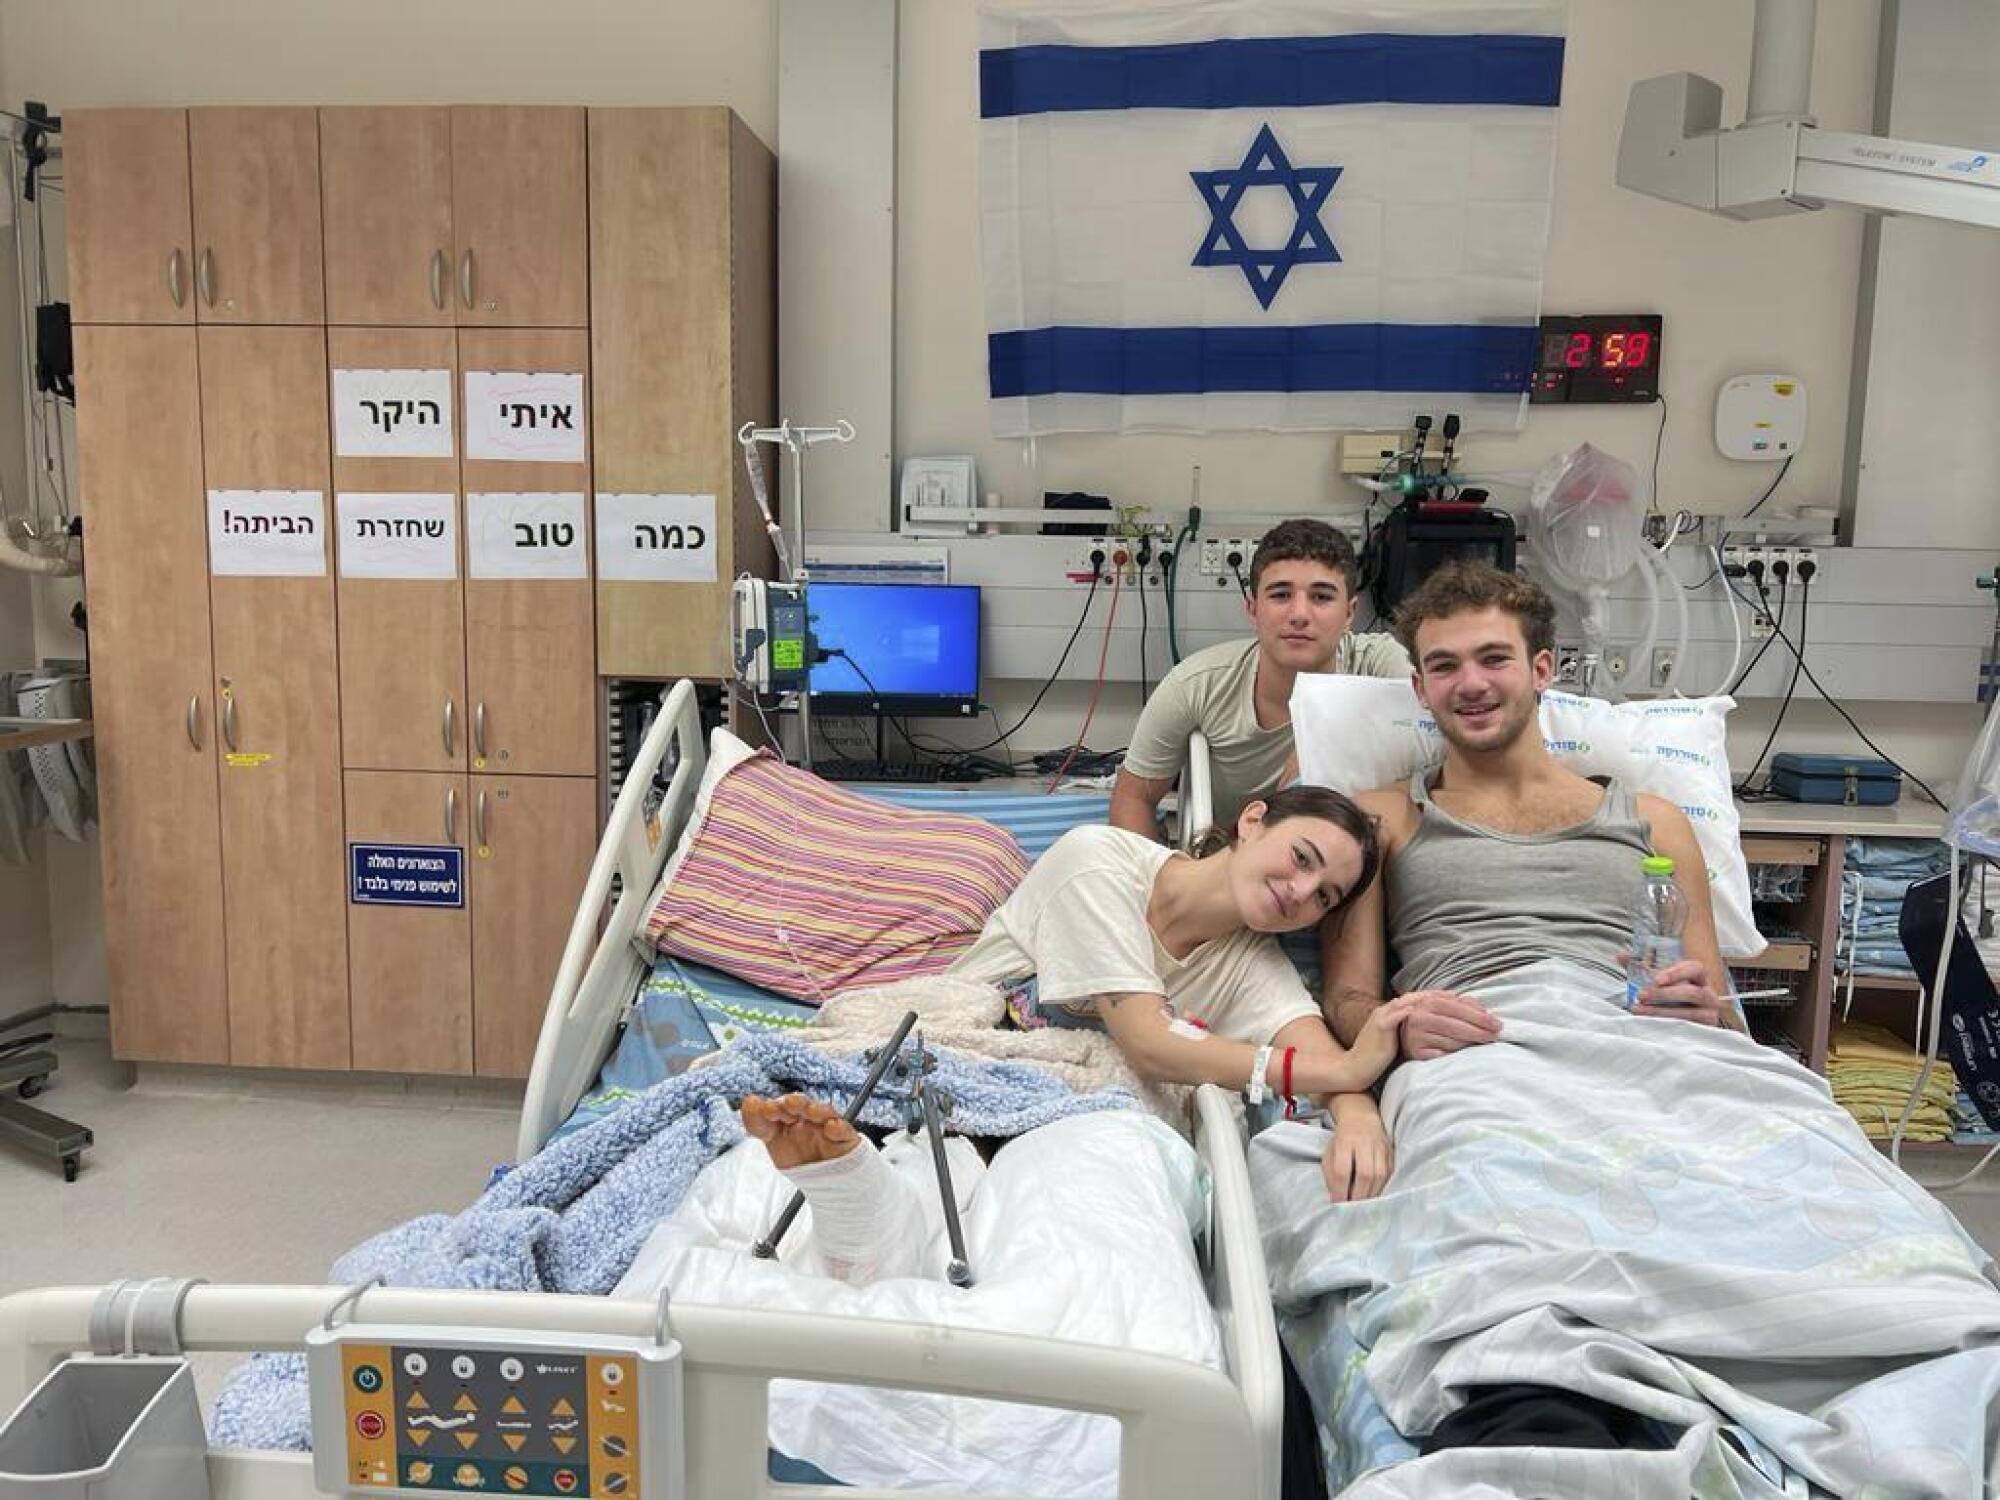 Brother and sister, who were released from captivity in Gaza, in an Israeli hospital